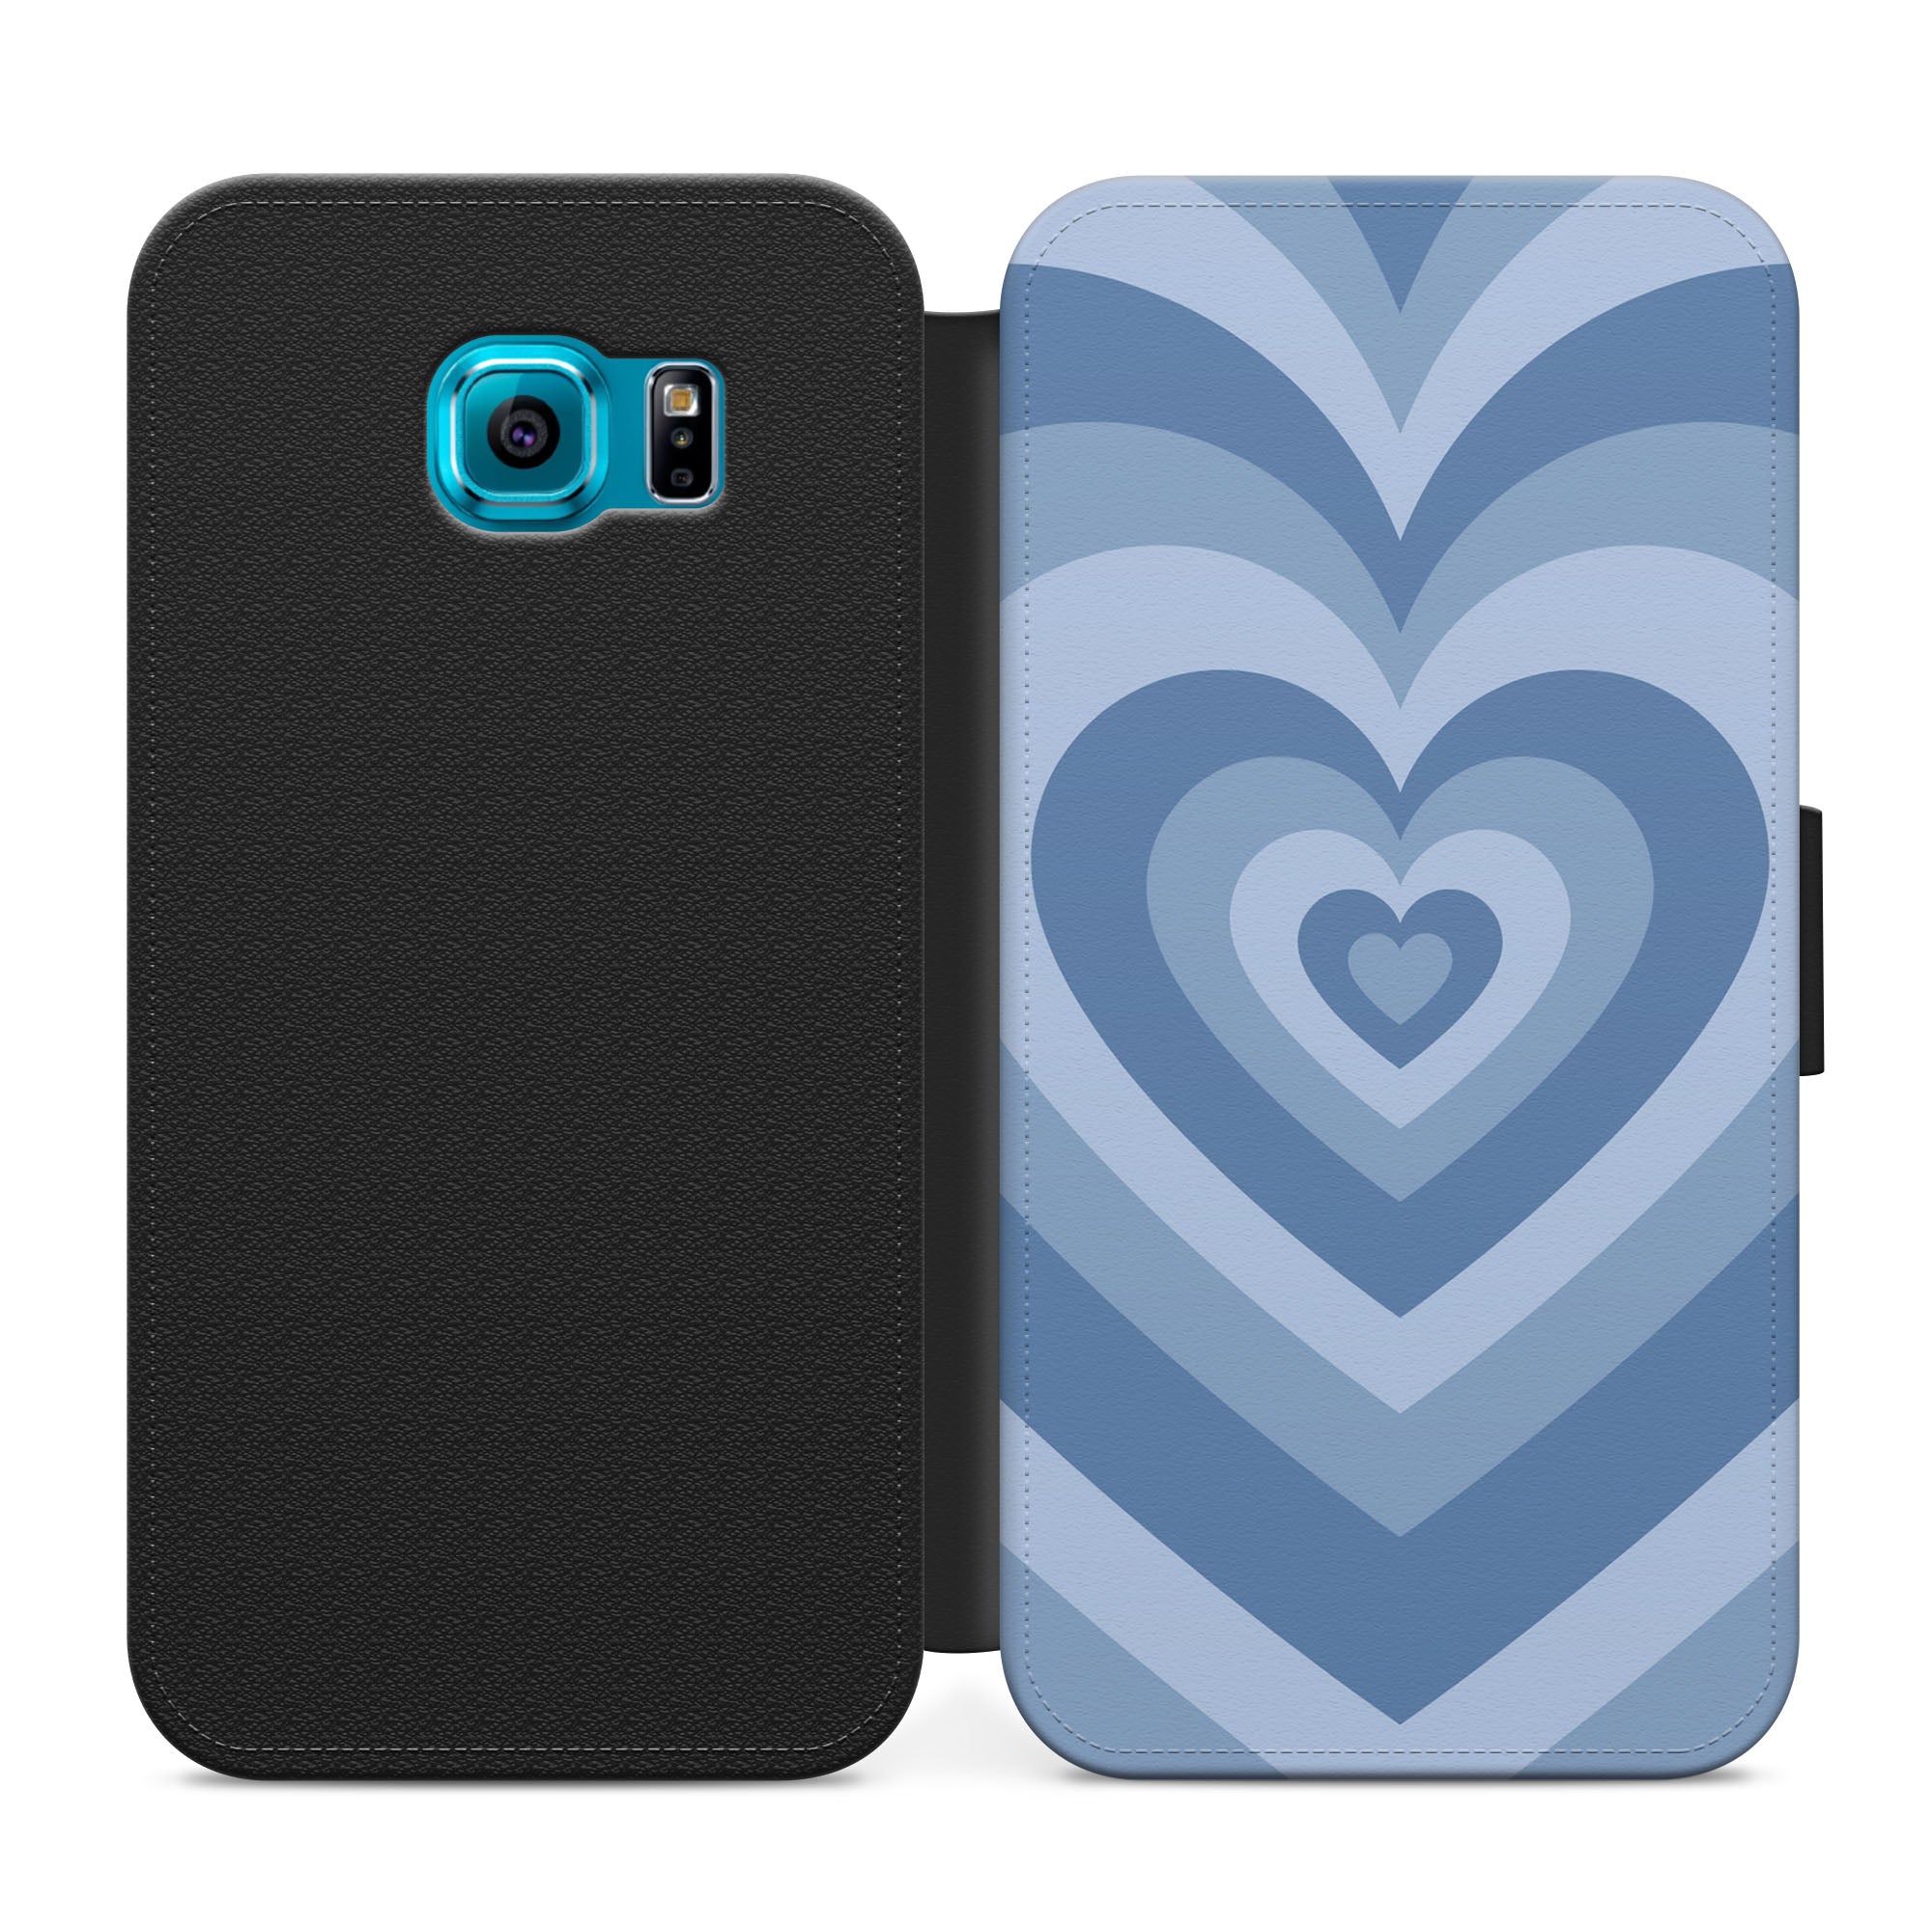 Retro Love Heart Faux Leather Flip Case Wallet for iPhone / Samsung